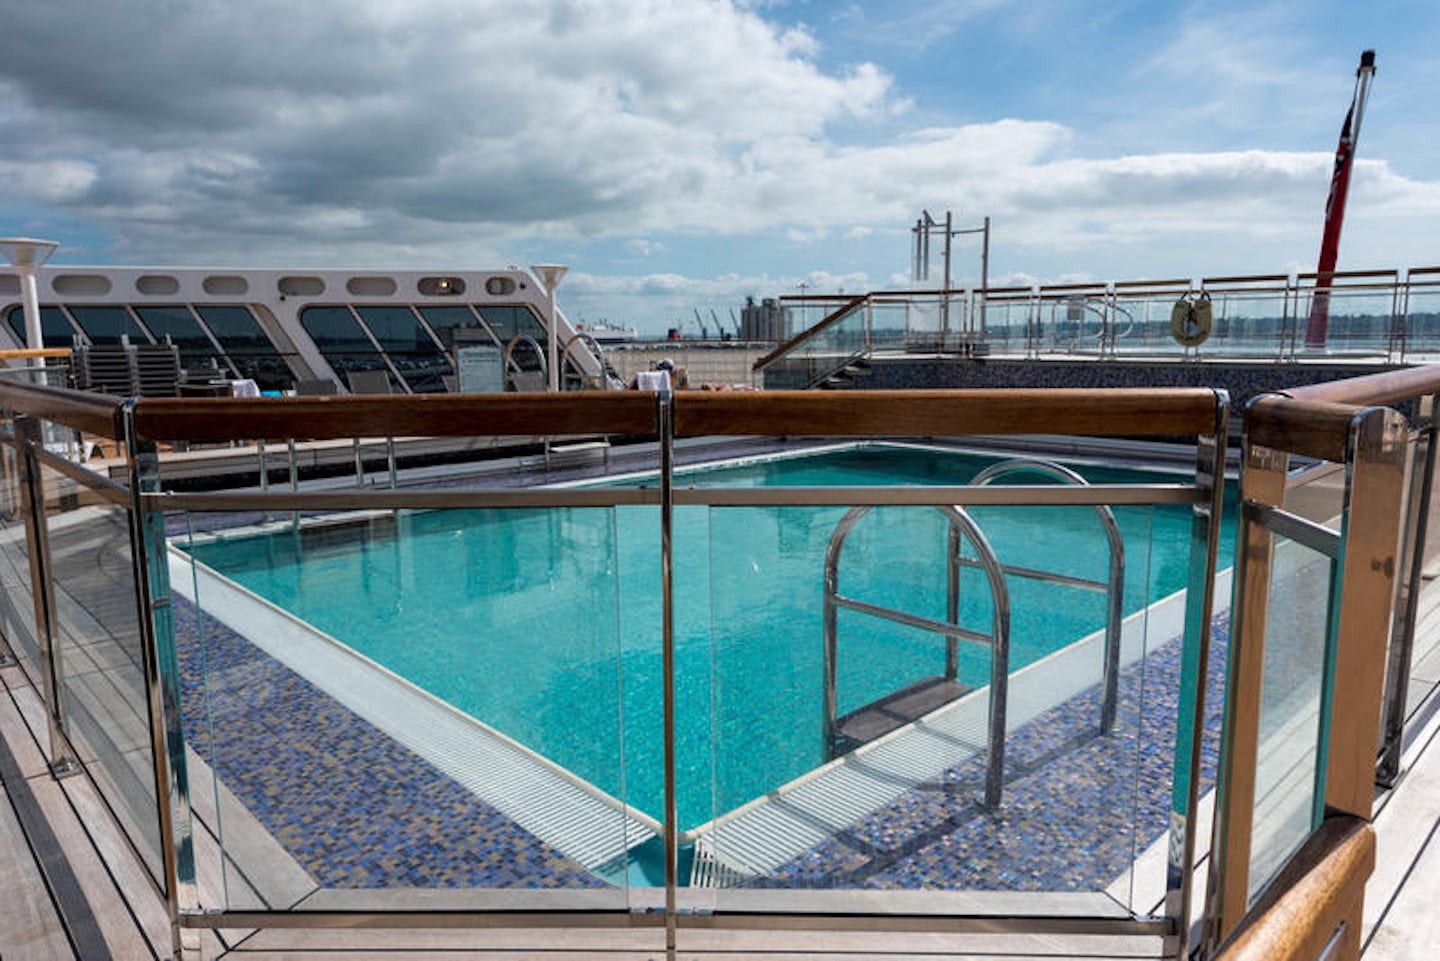 The Minnows Pool on Queen Mary 2 (QM2)